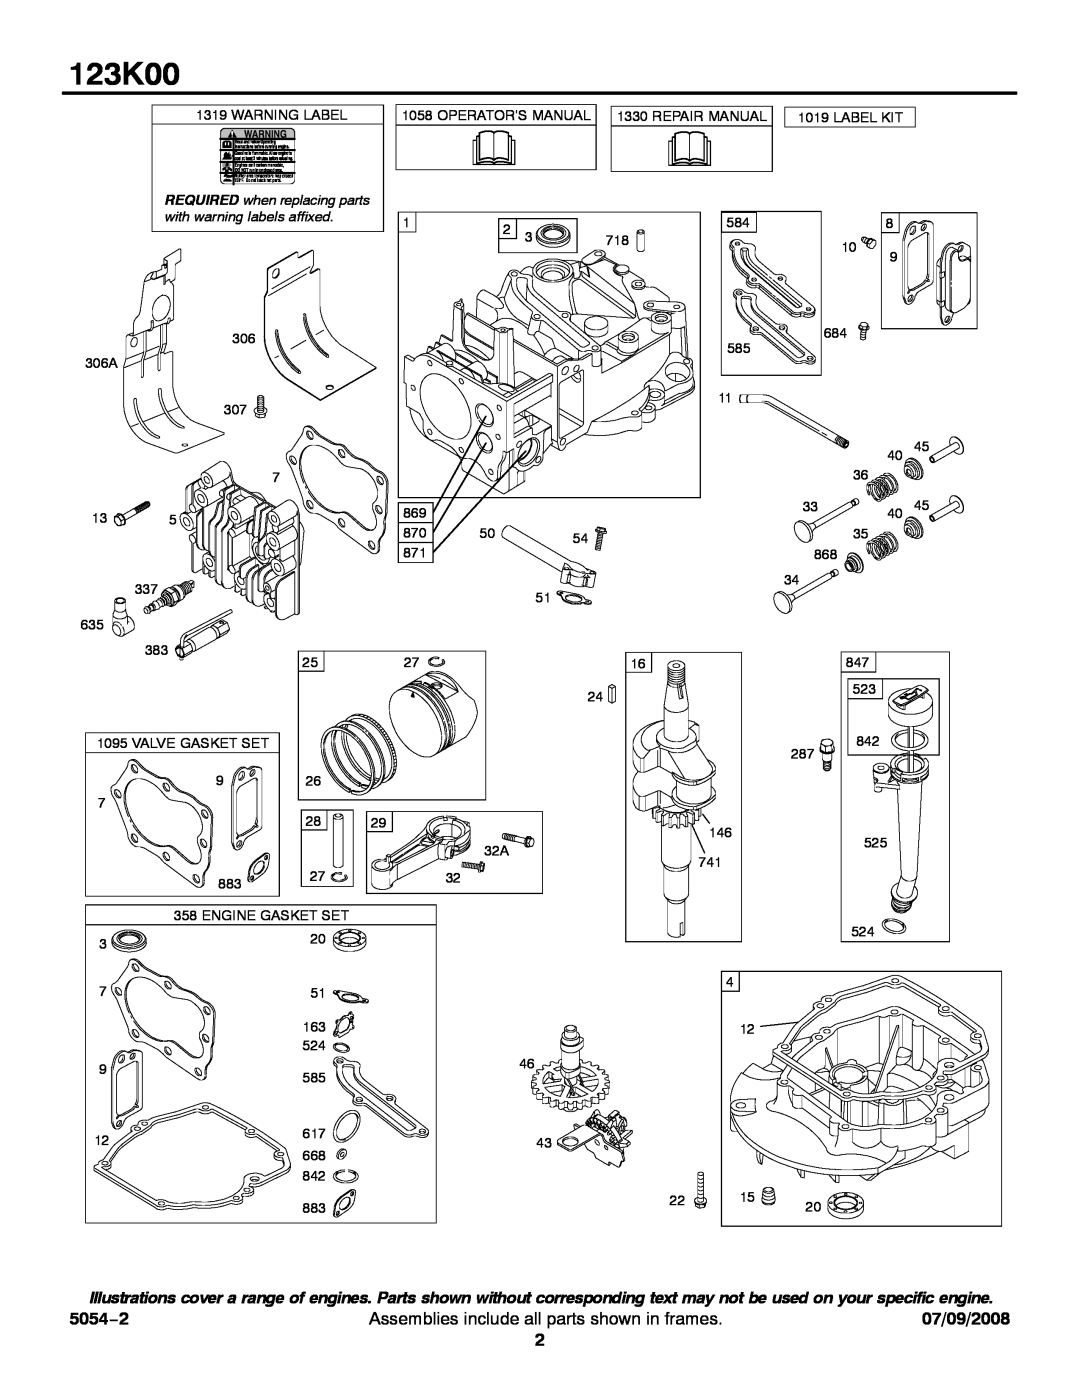 Briggs & Stratton 123K00 0236 5054−2, Assemblies include all parts shown in frames, 07/09/2008, Warning Label, Label Kit 